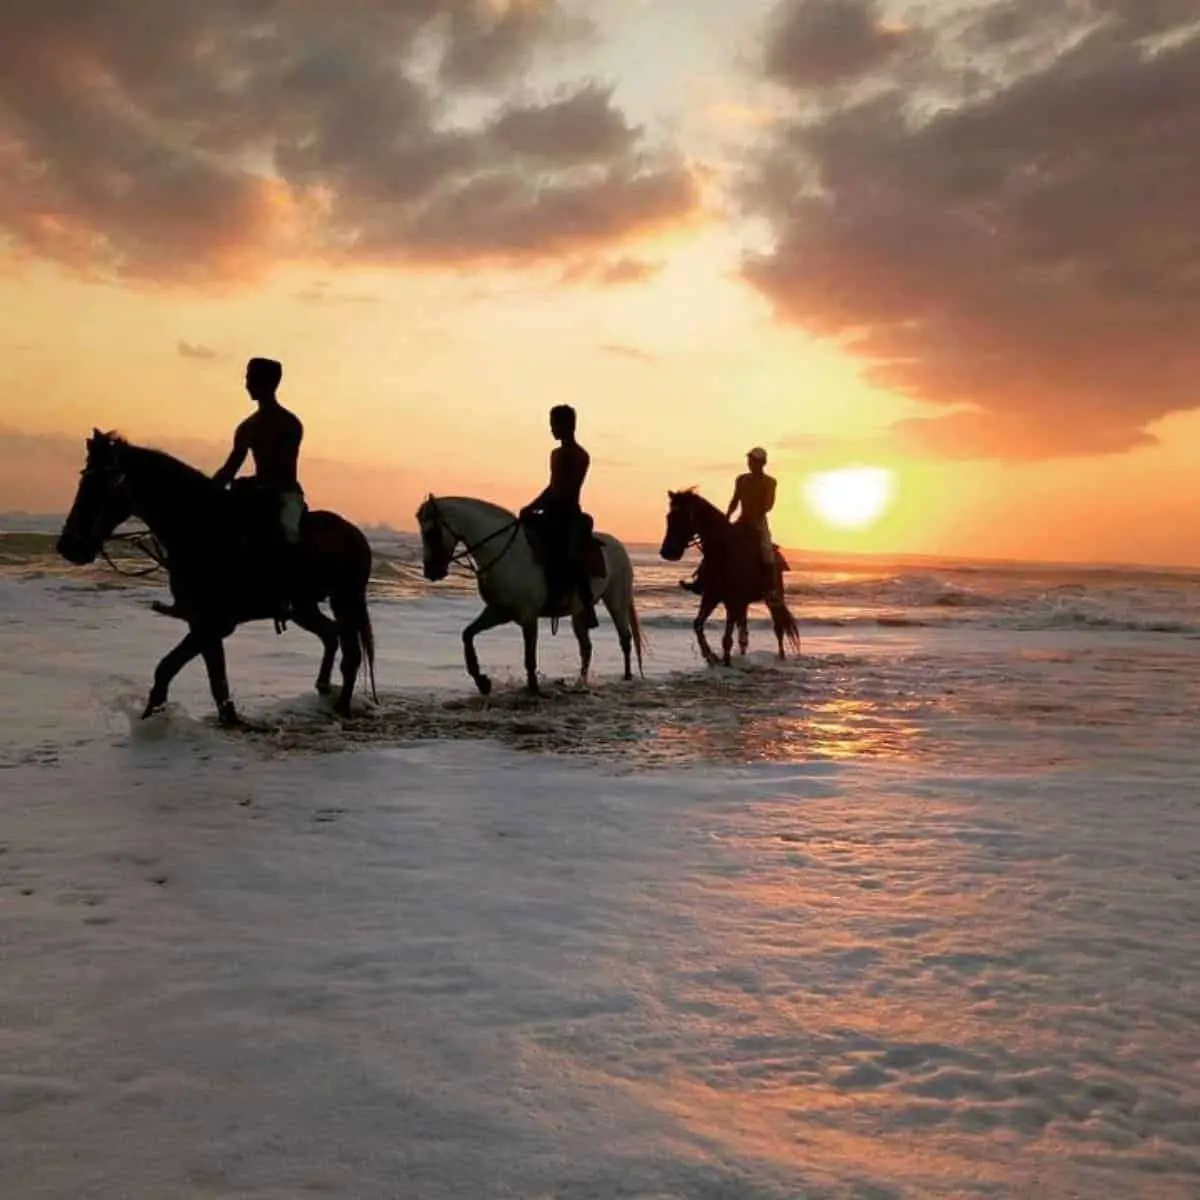 Horse riding in Bali as an activity